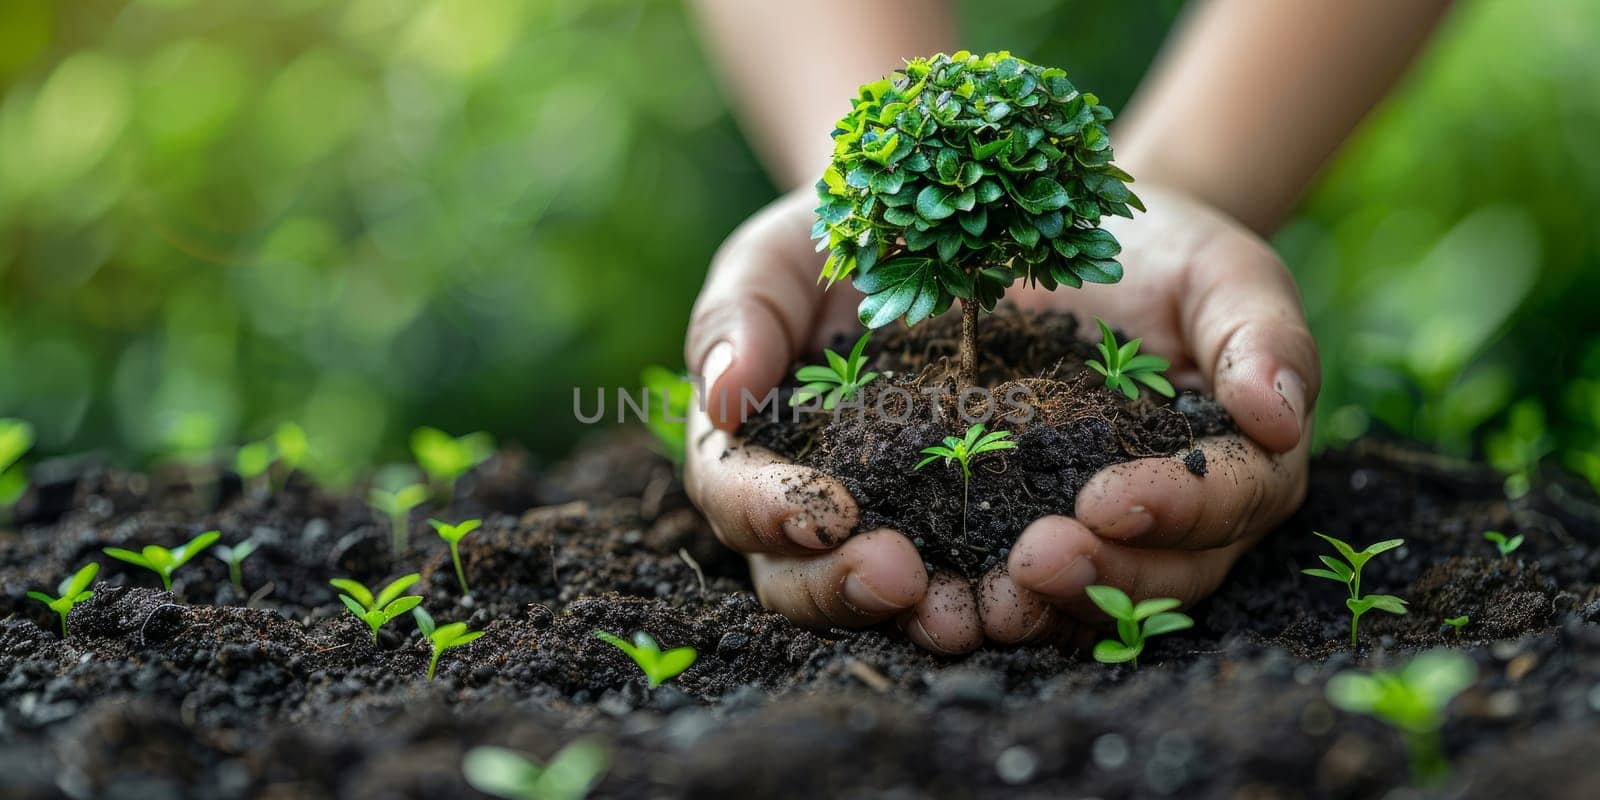 Hands nurturing young plant seedling in fertile soil. Concept of environmental conservation, sustainable gardening, and eco friendly living.